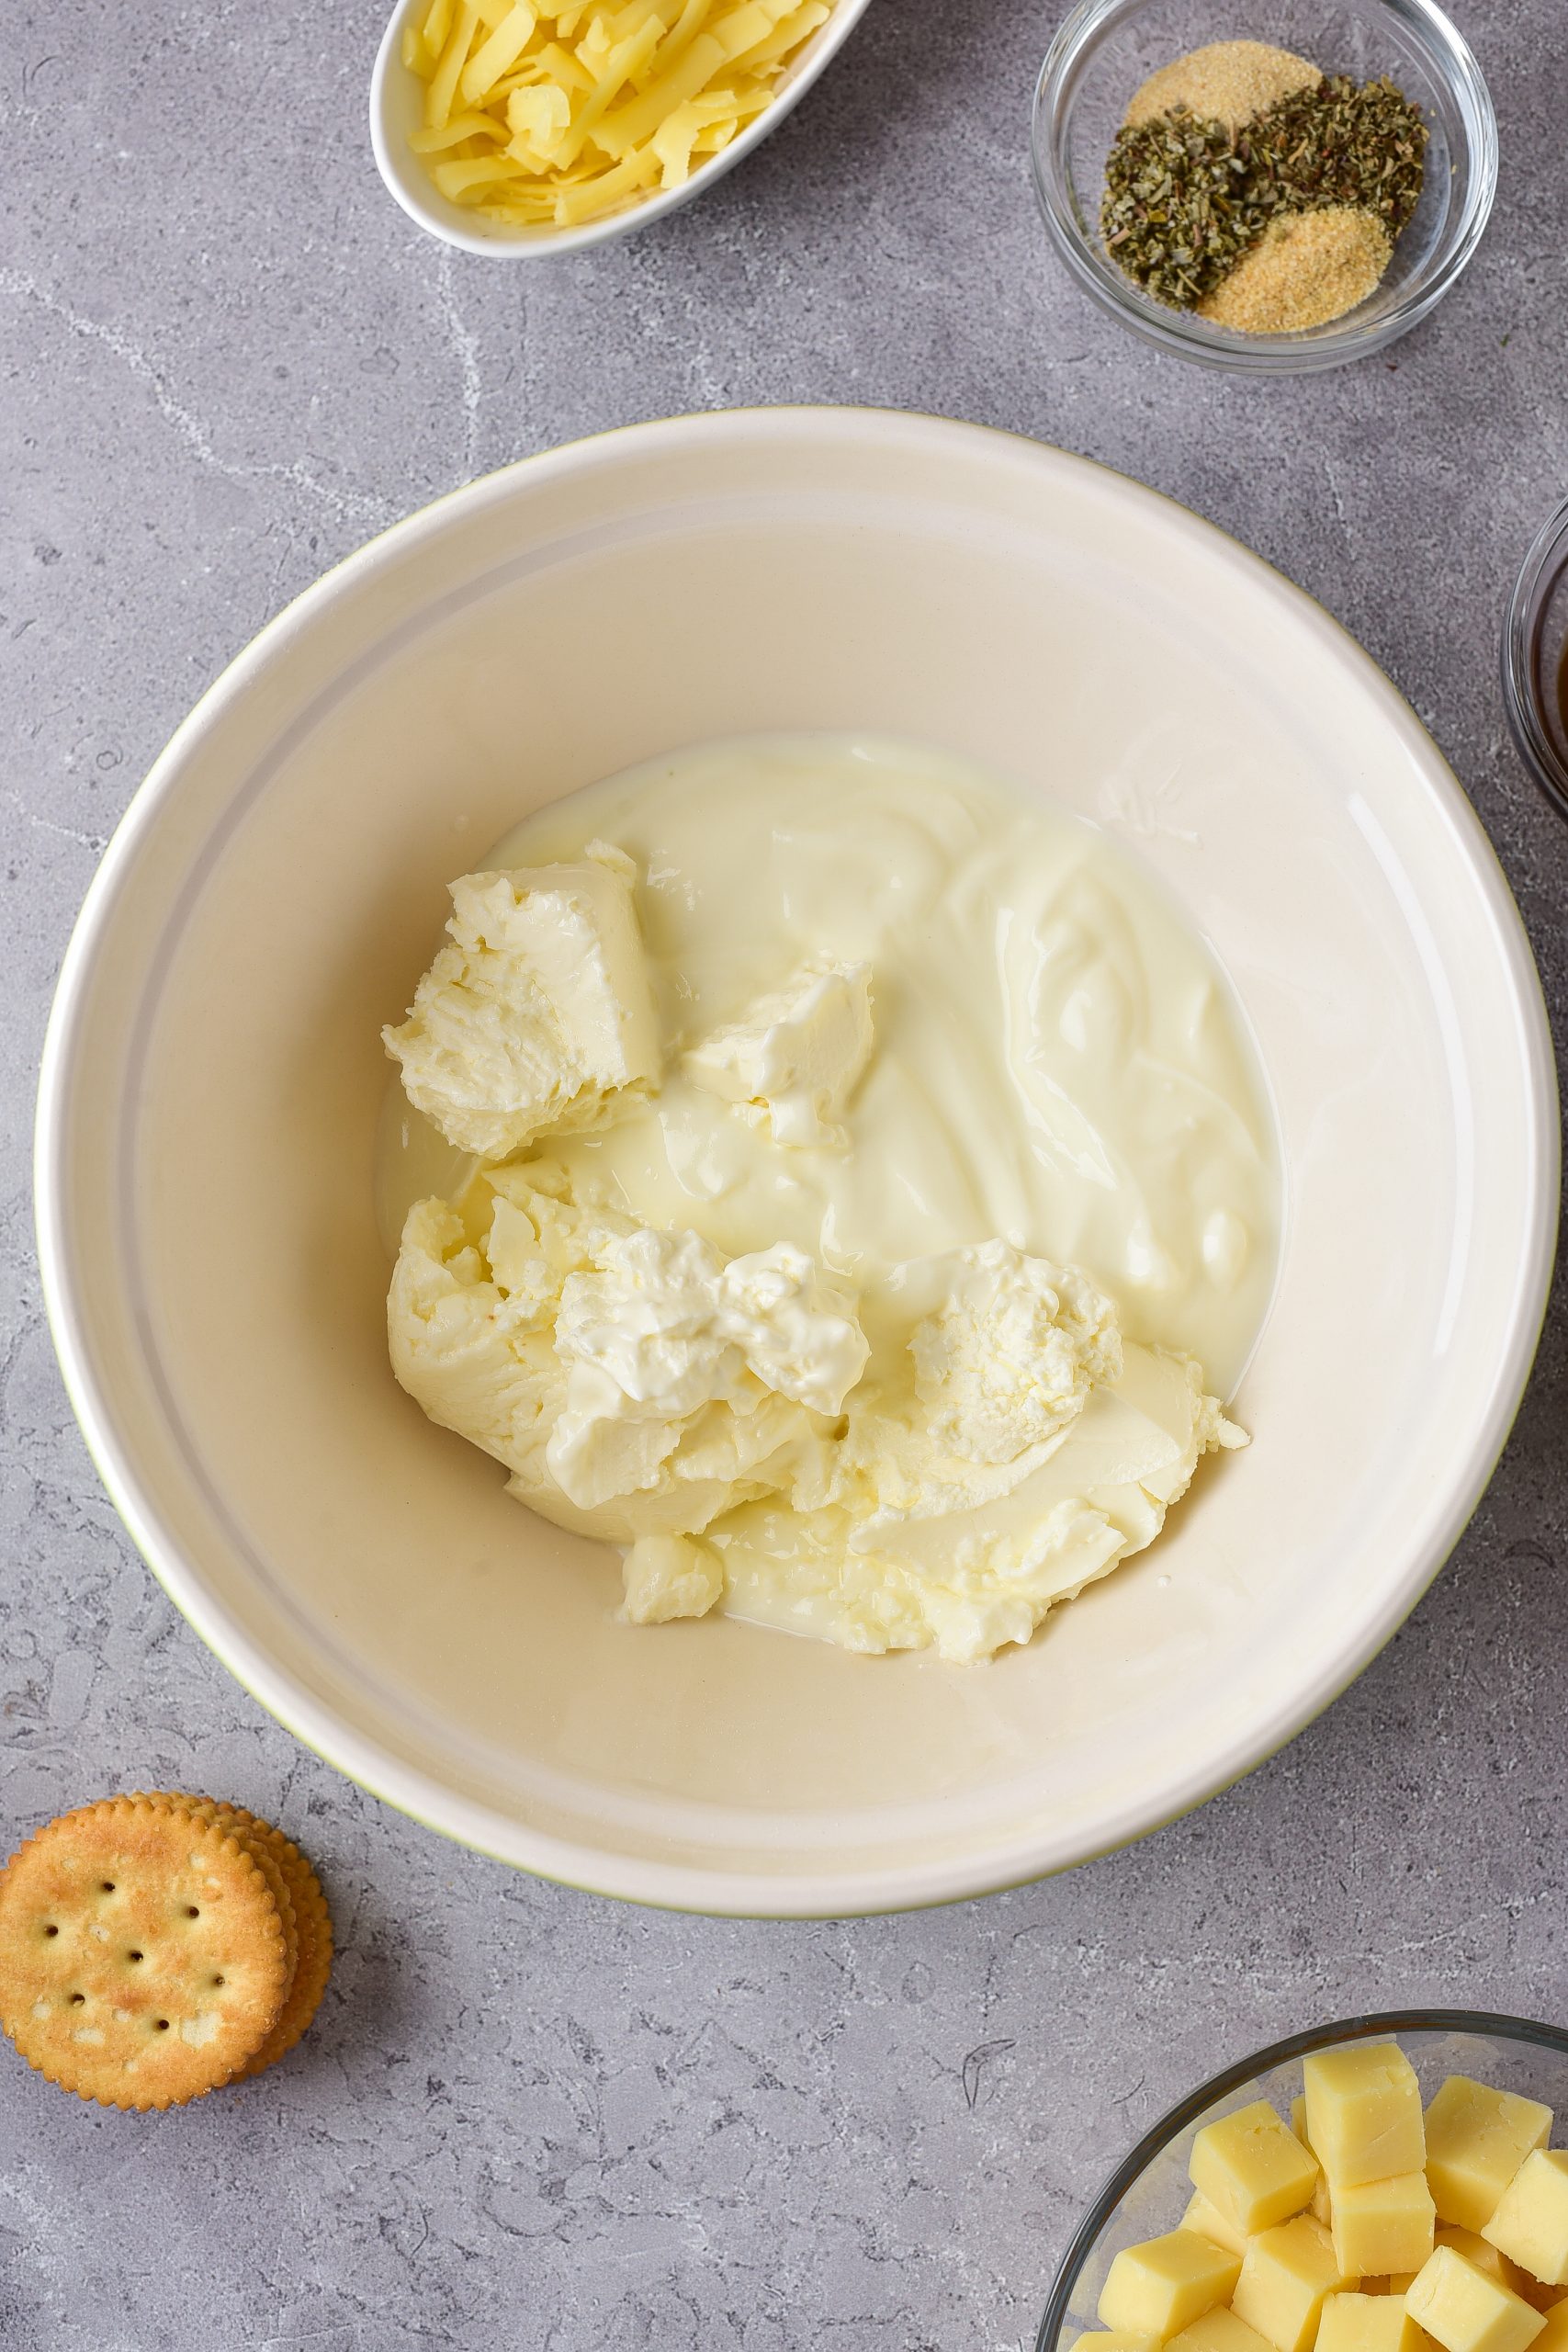 In a bowl, beat together the sour cream, and cream cheese.